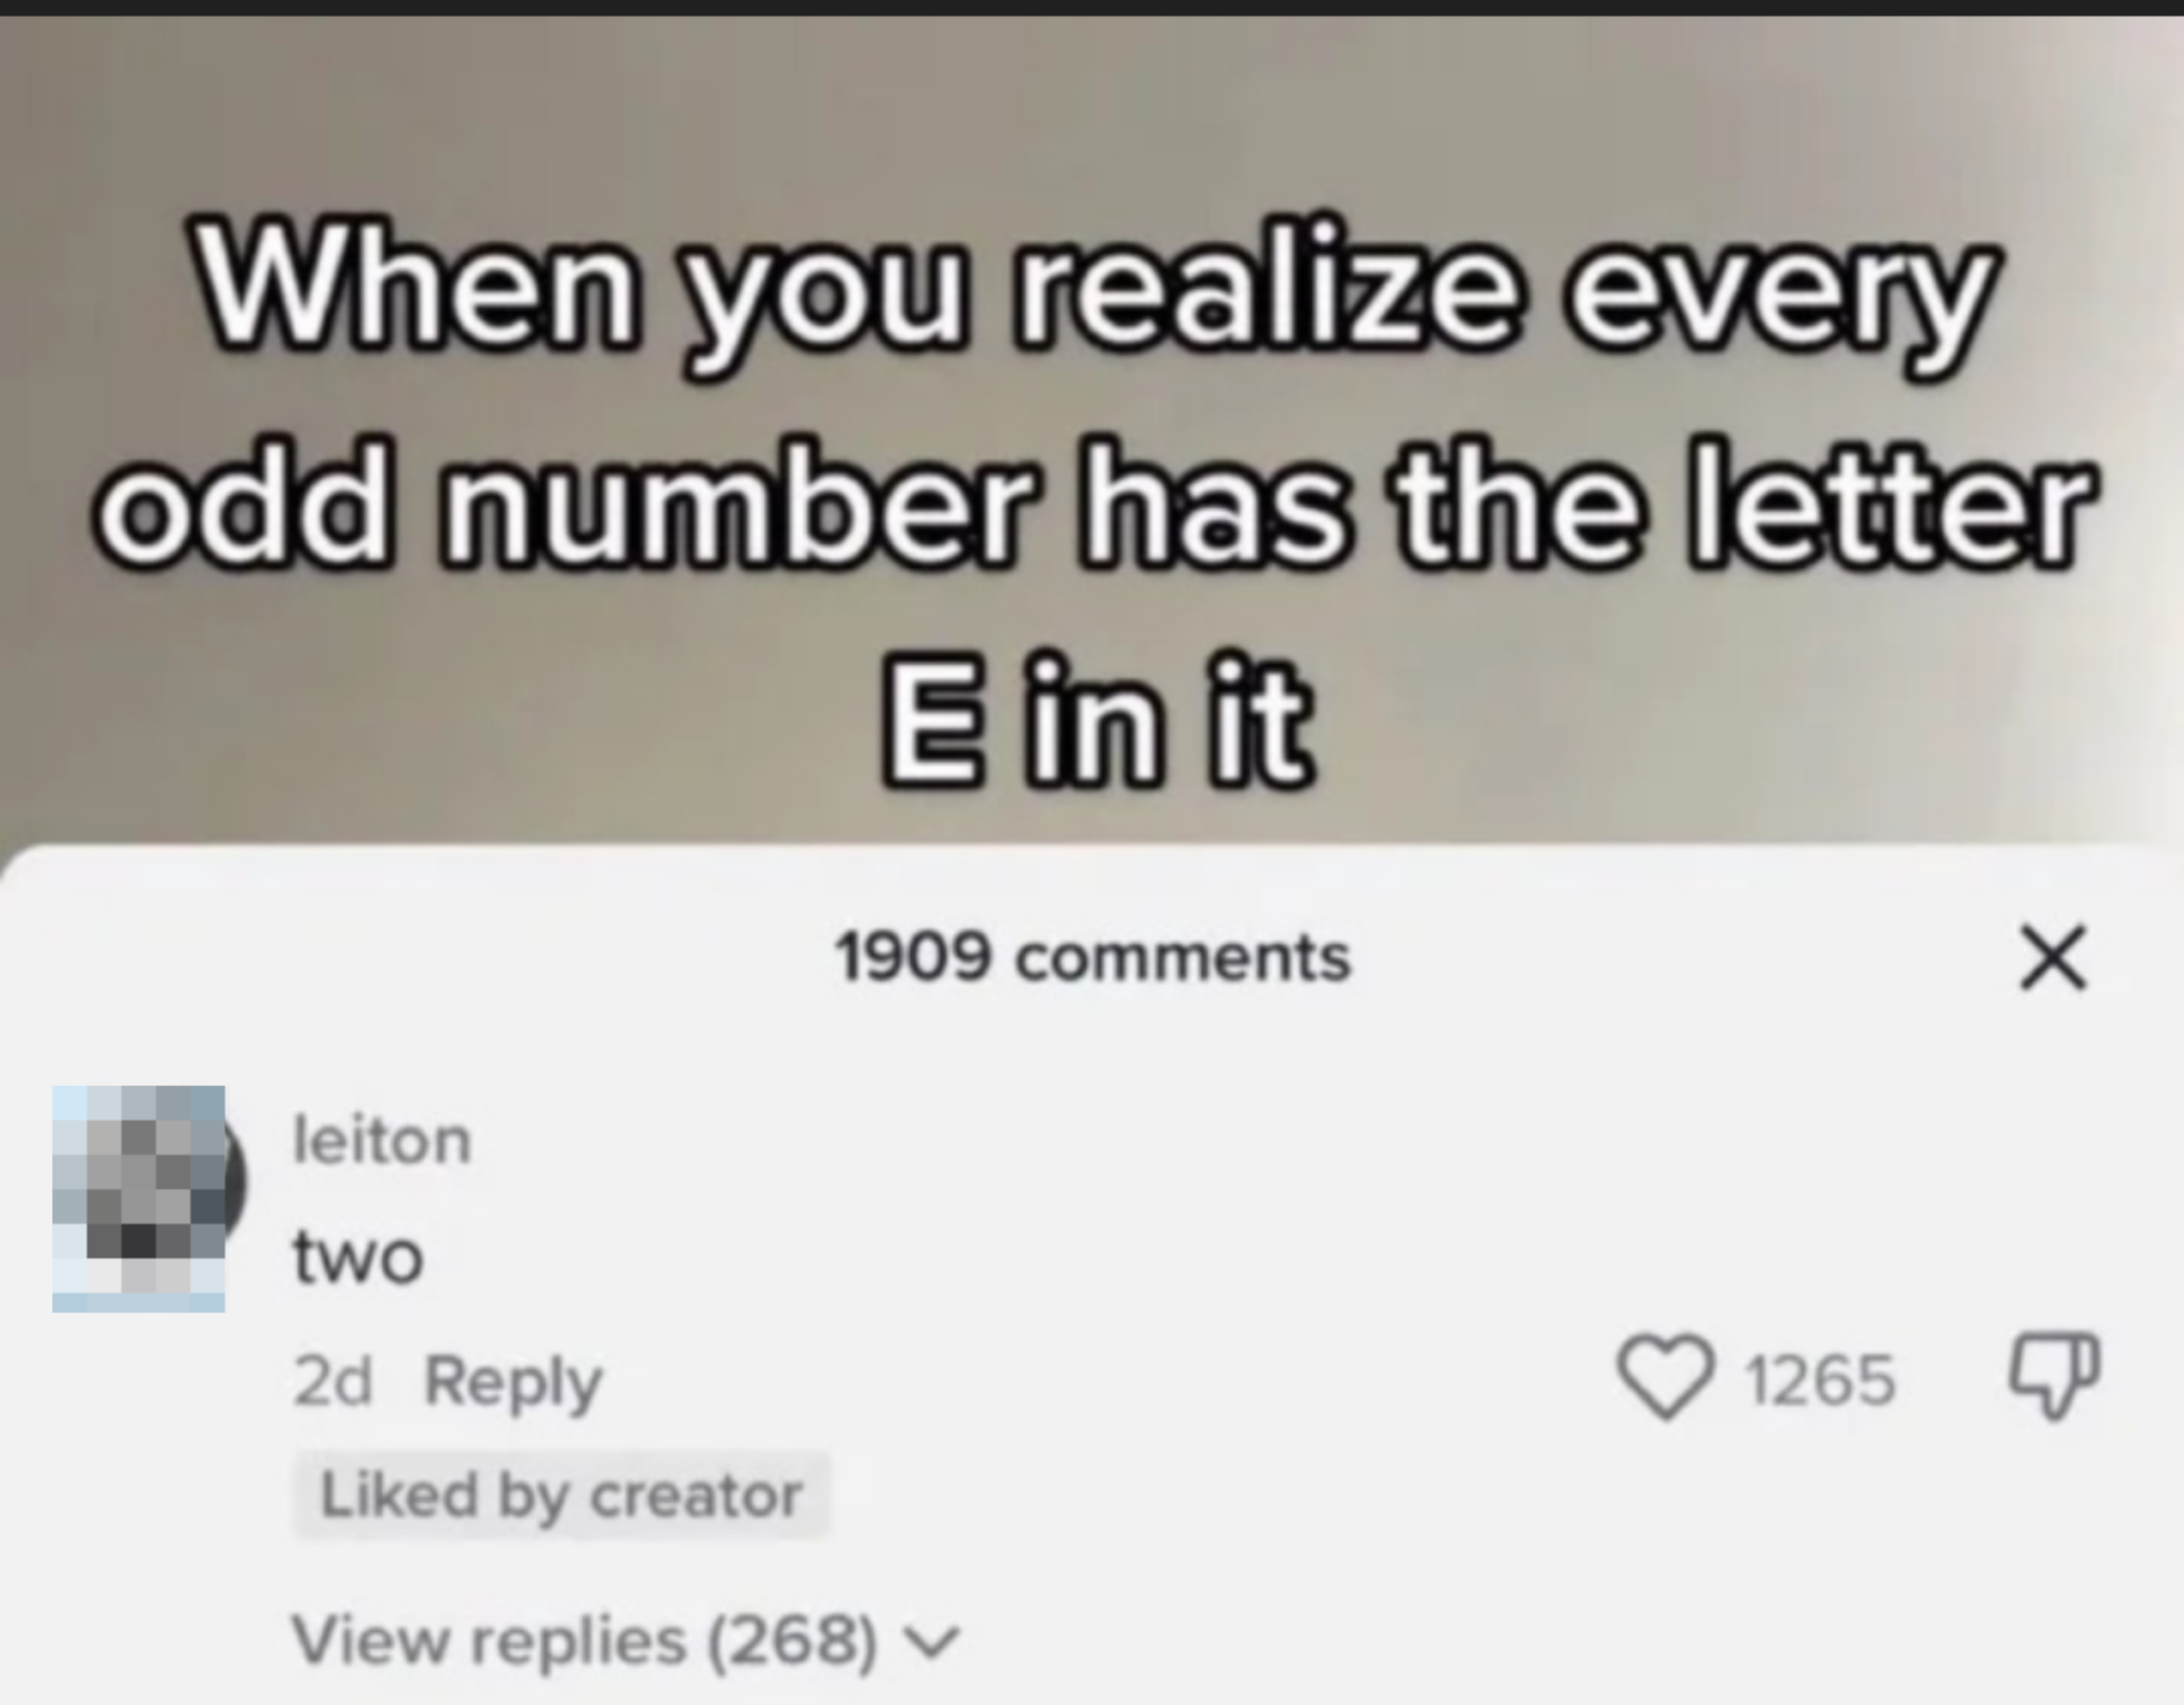 Text reads &quot;When you realize every odd number has the letter E in it&quot; with a comment below saying &quot;two&quot;